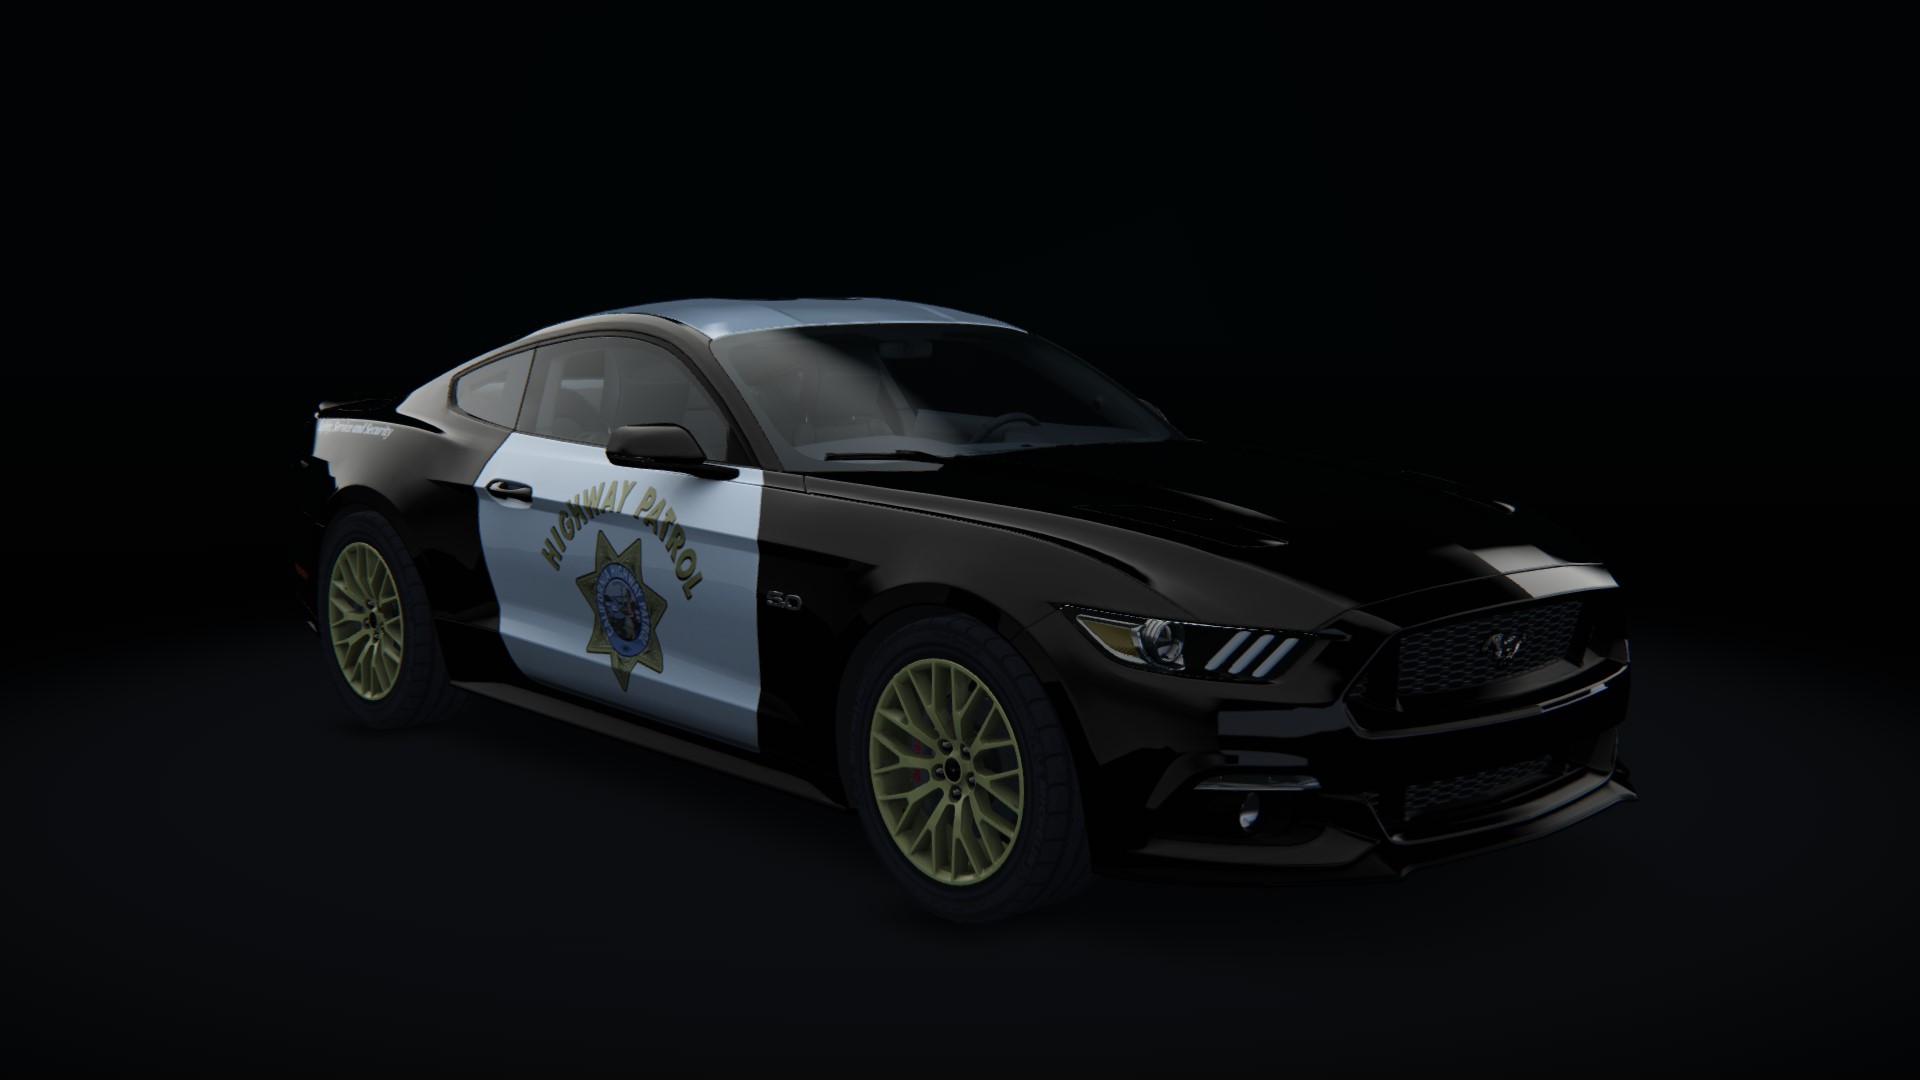 Ford Mustang 2015, skin chp_unit_29